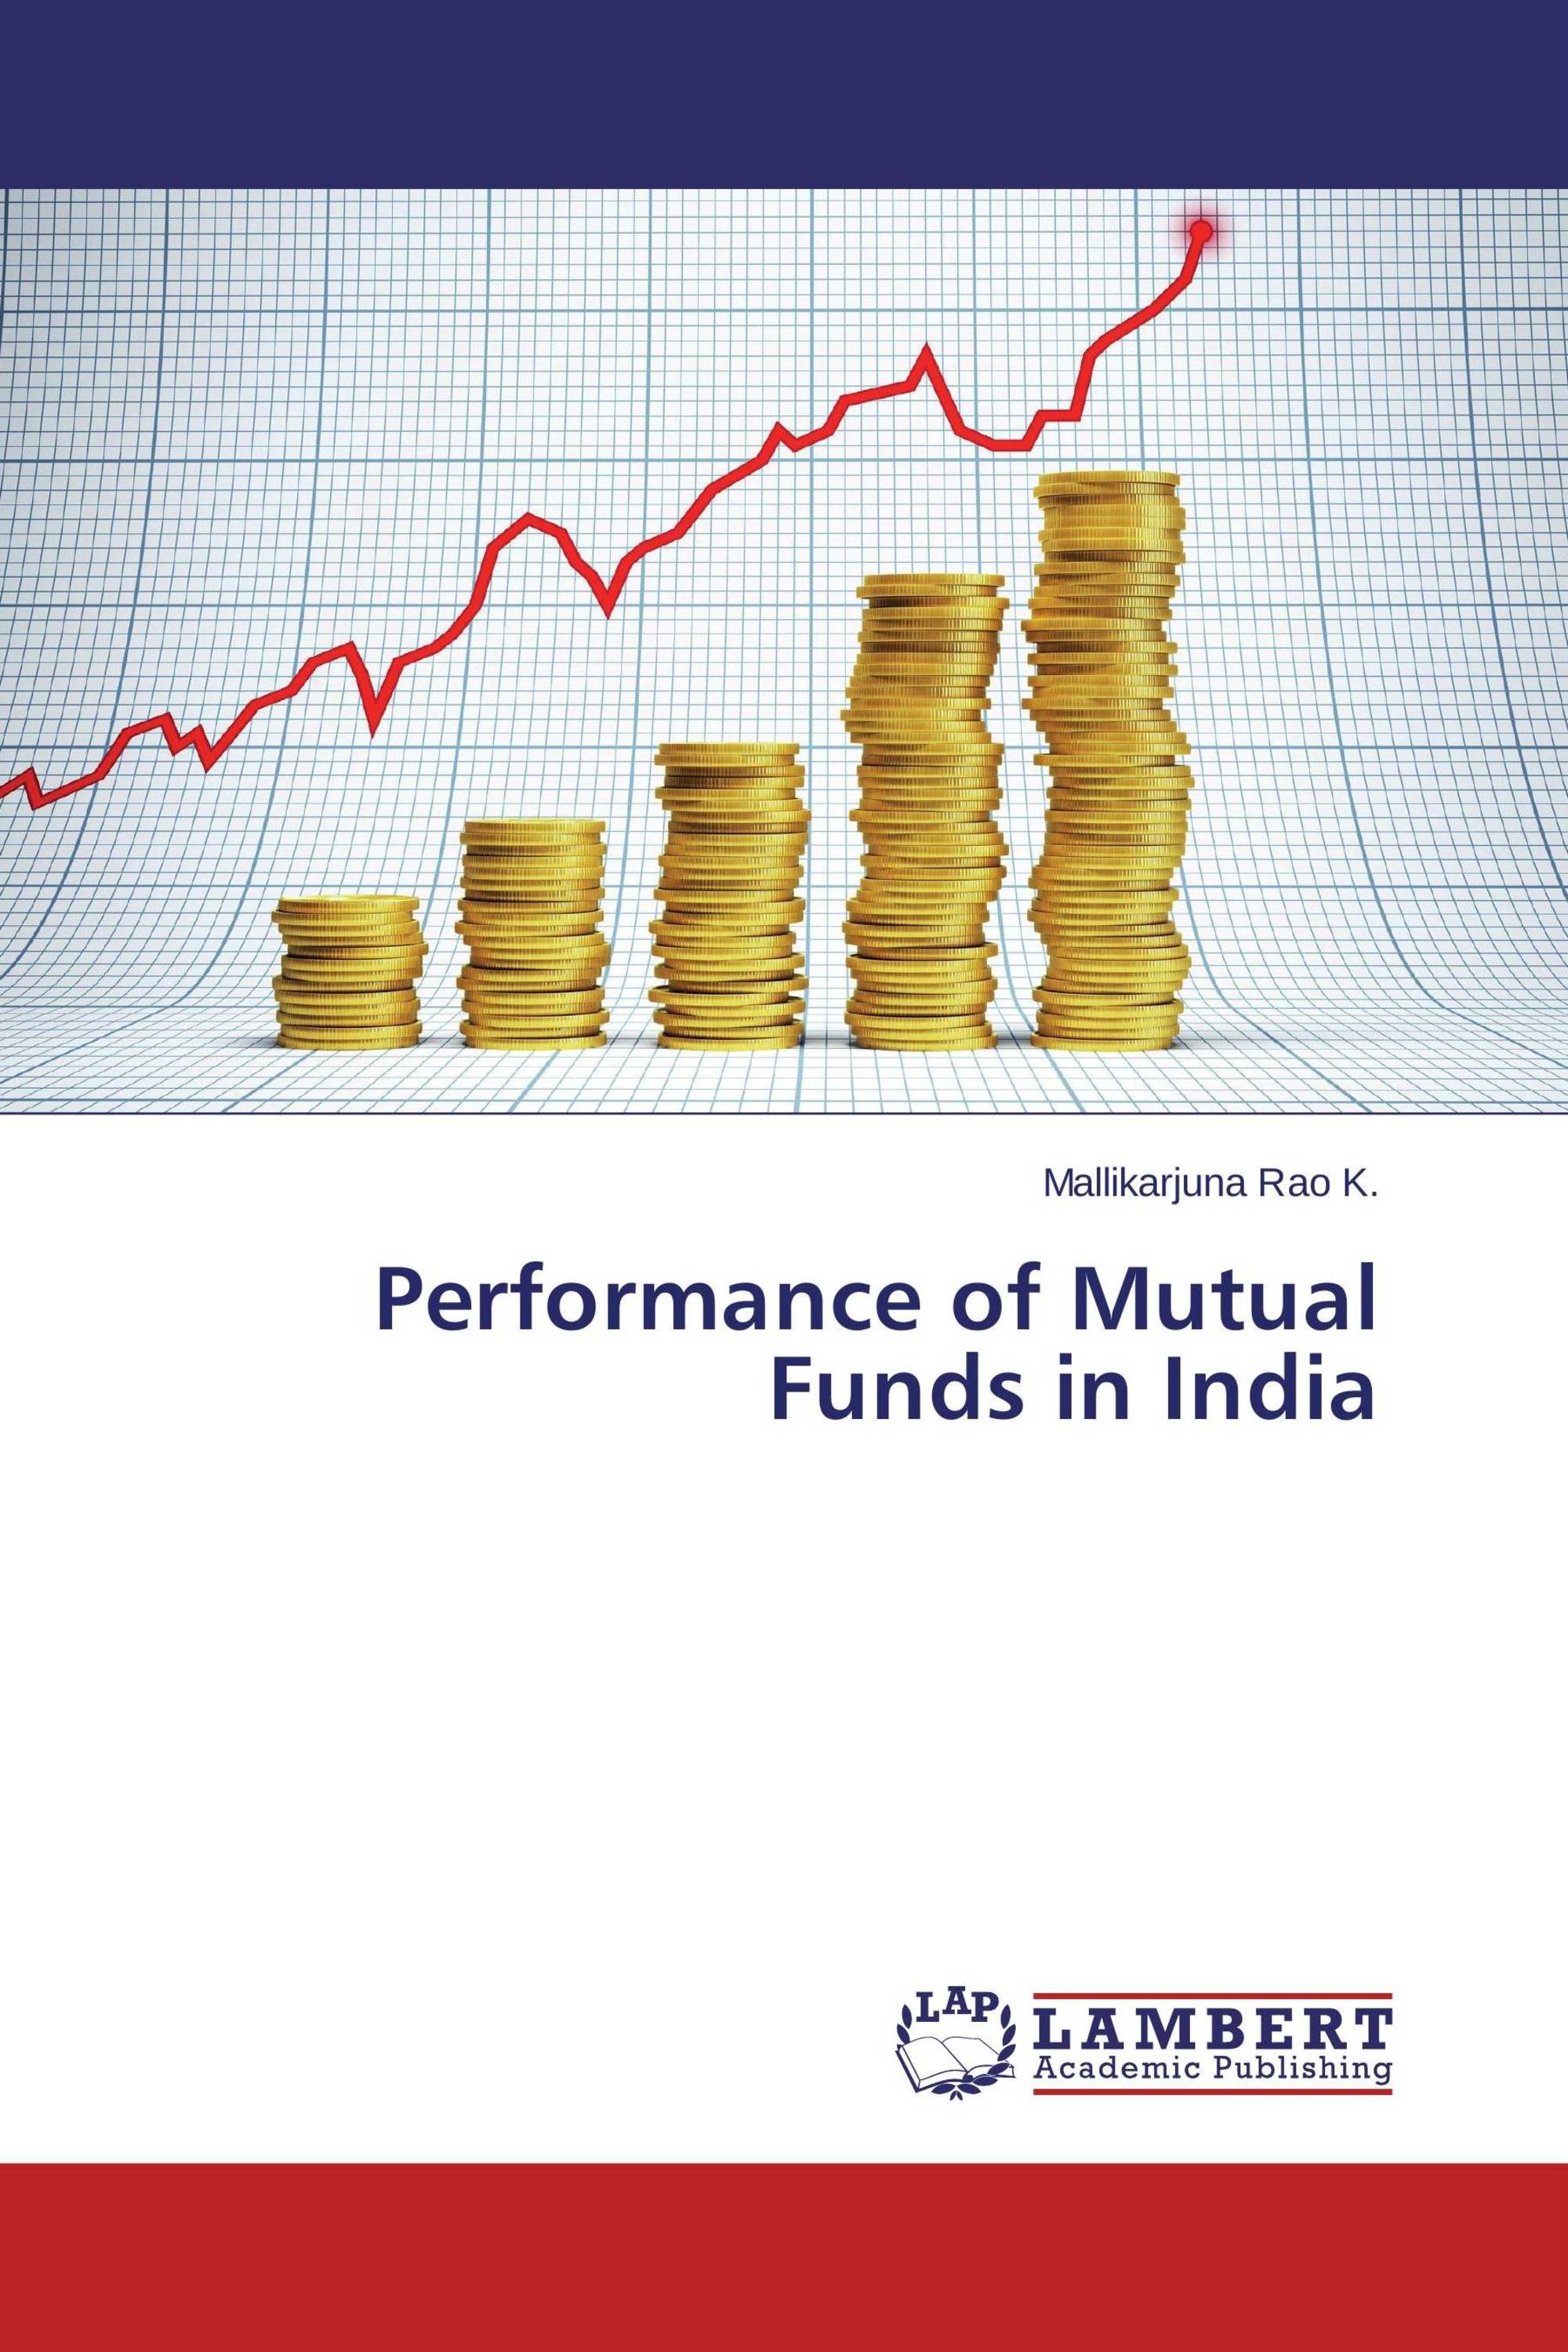 literature review of mutual fund in india